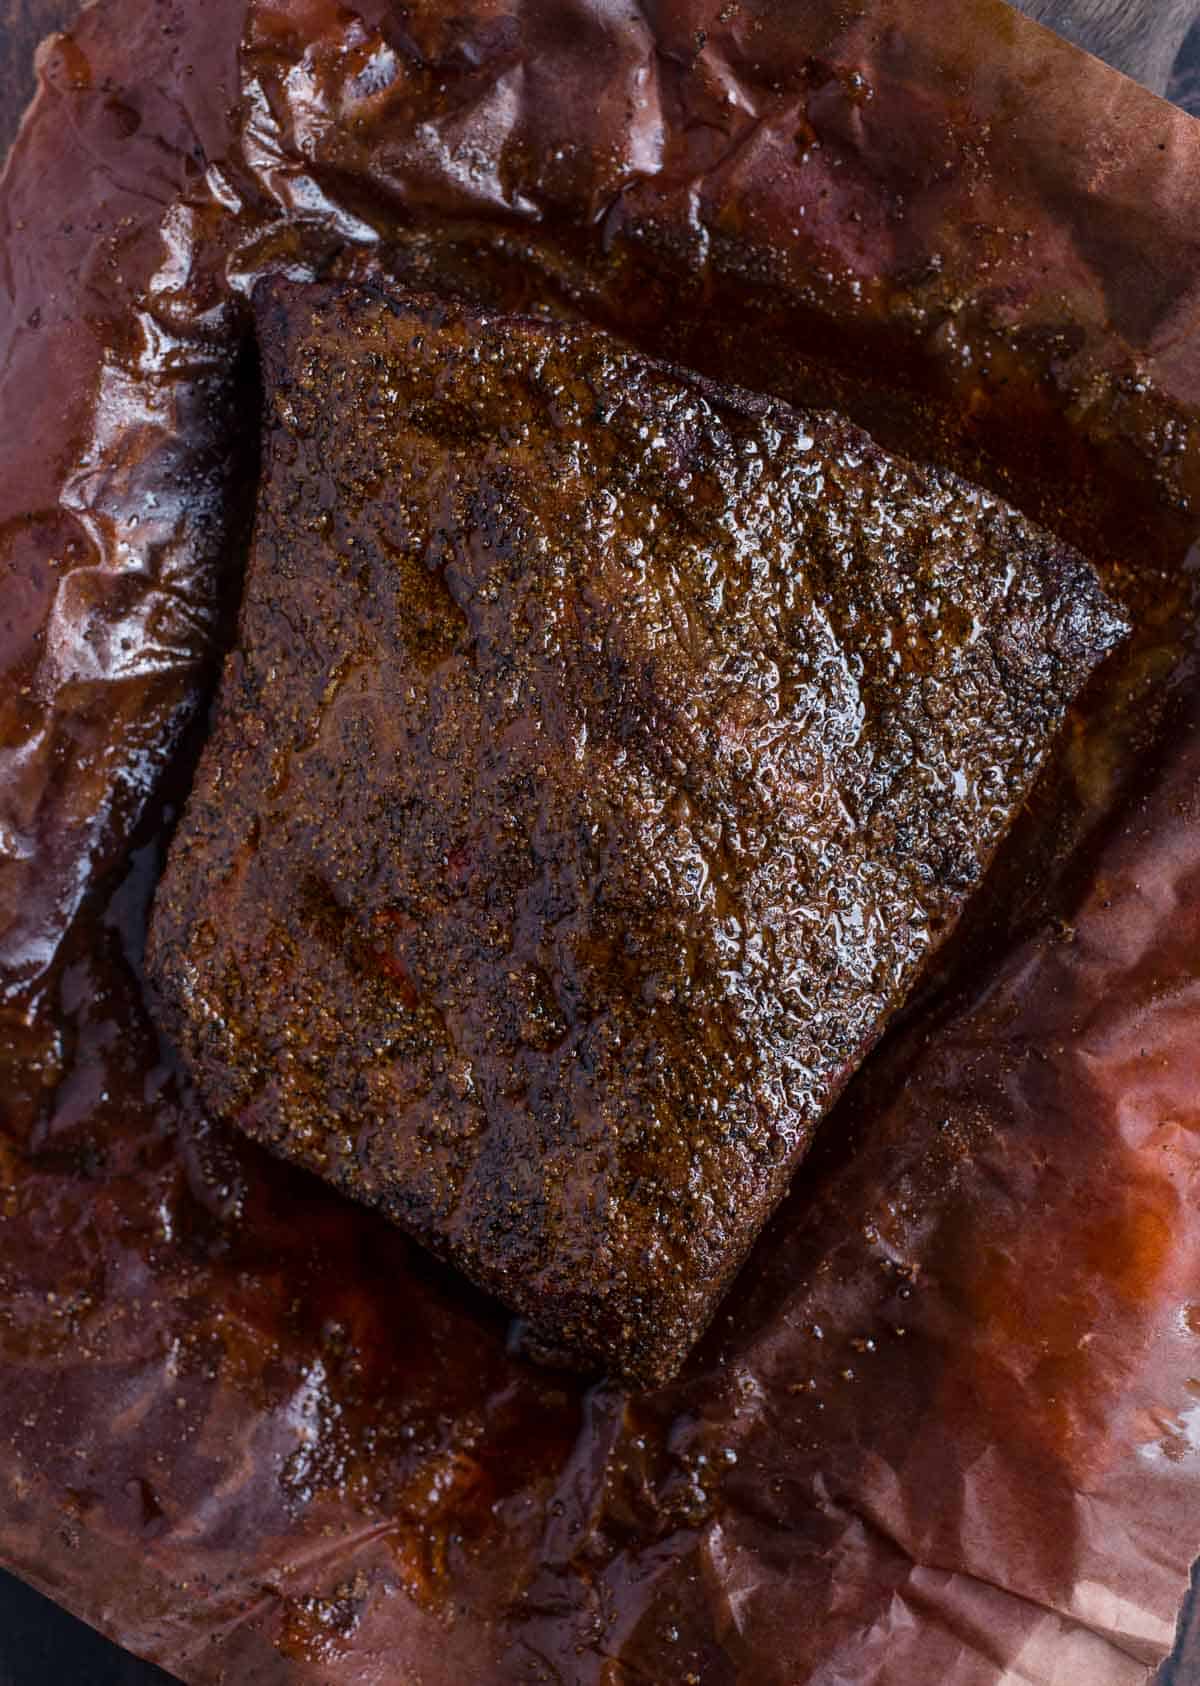 A smoked brisket flat after resting one hour